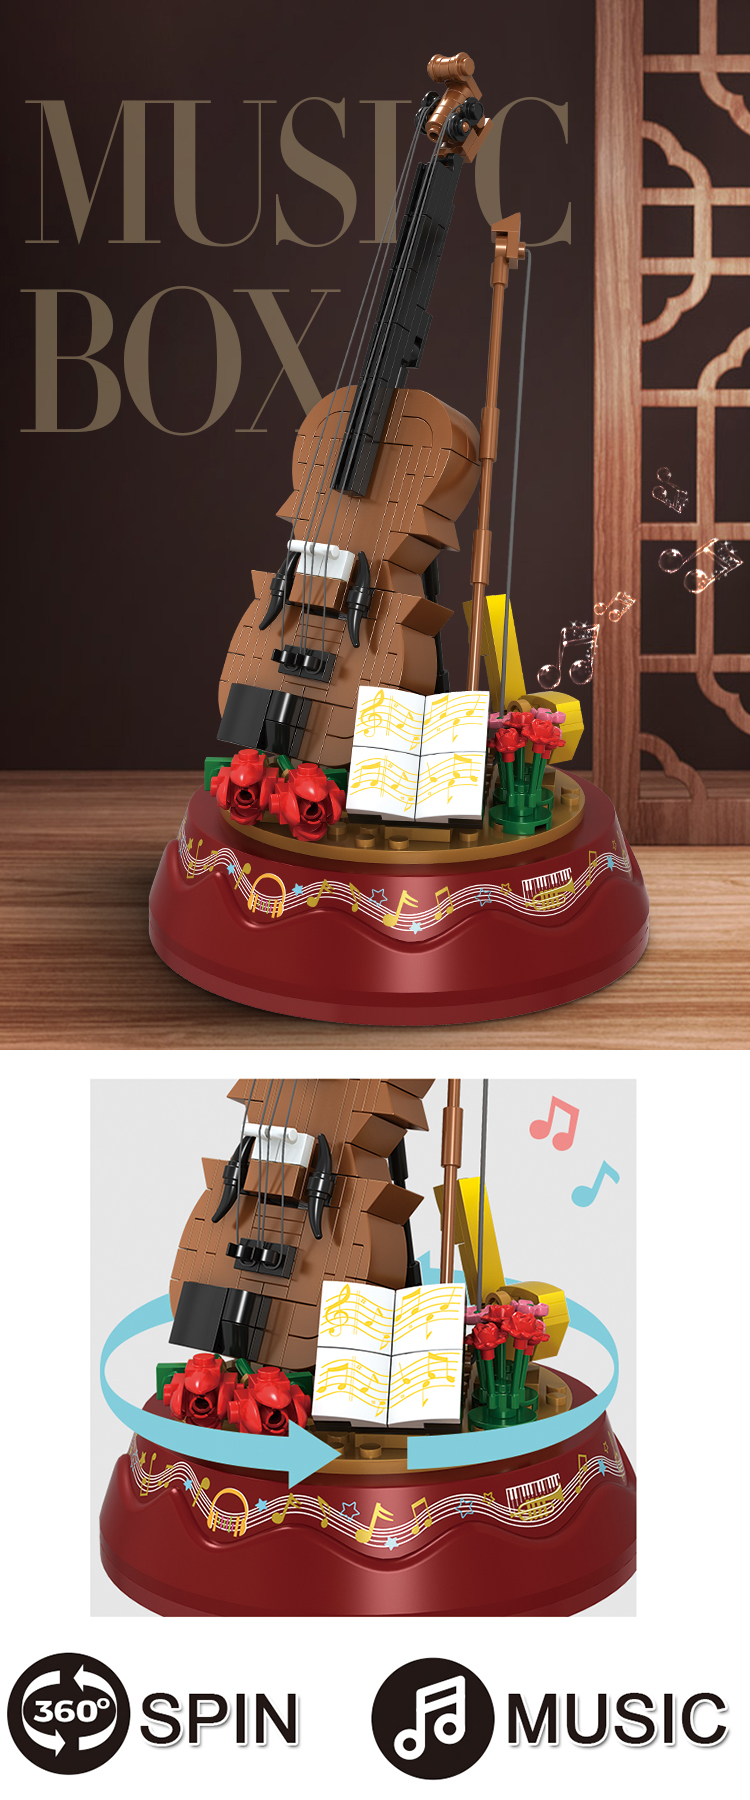 WOMA TOYS Wholesale Children Day Christmas Gifts Kids Educational Spin Play Violin Model Music Box Building Blocks Bricks